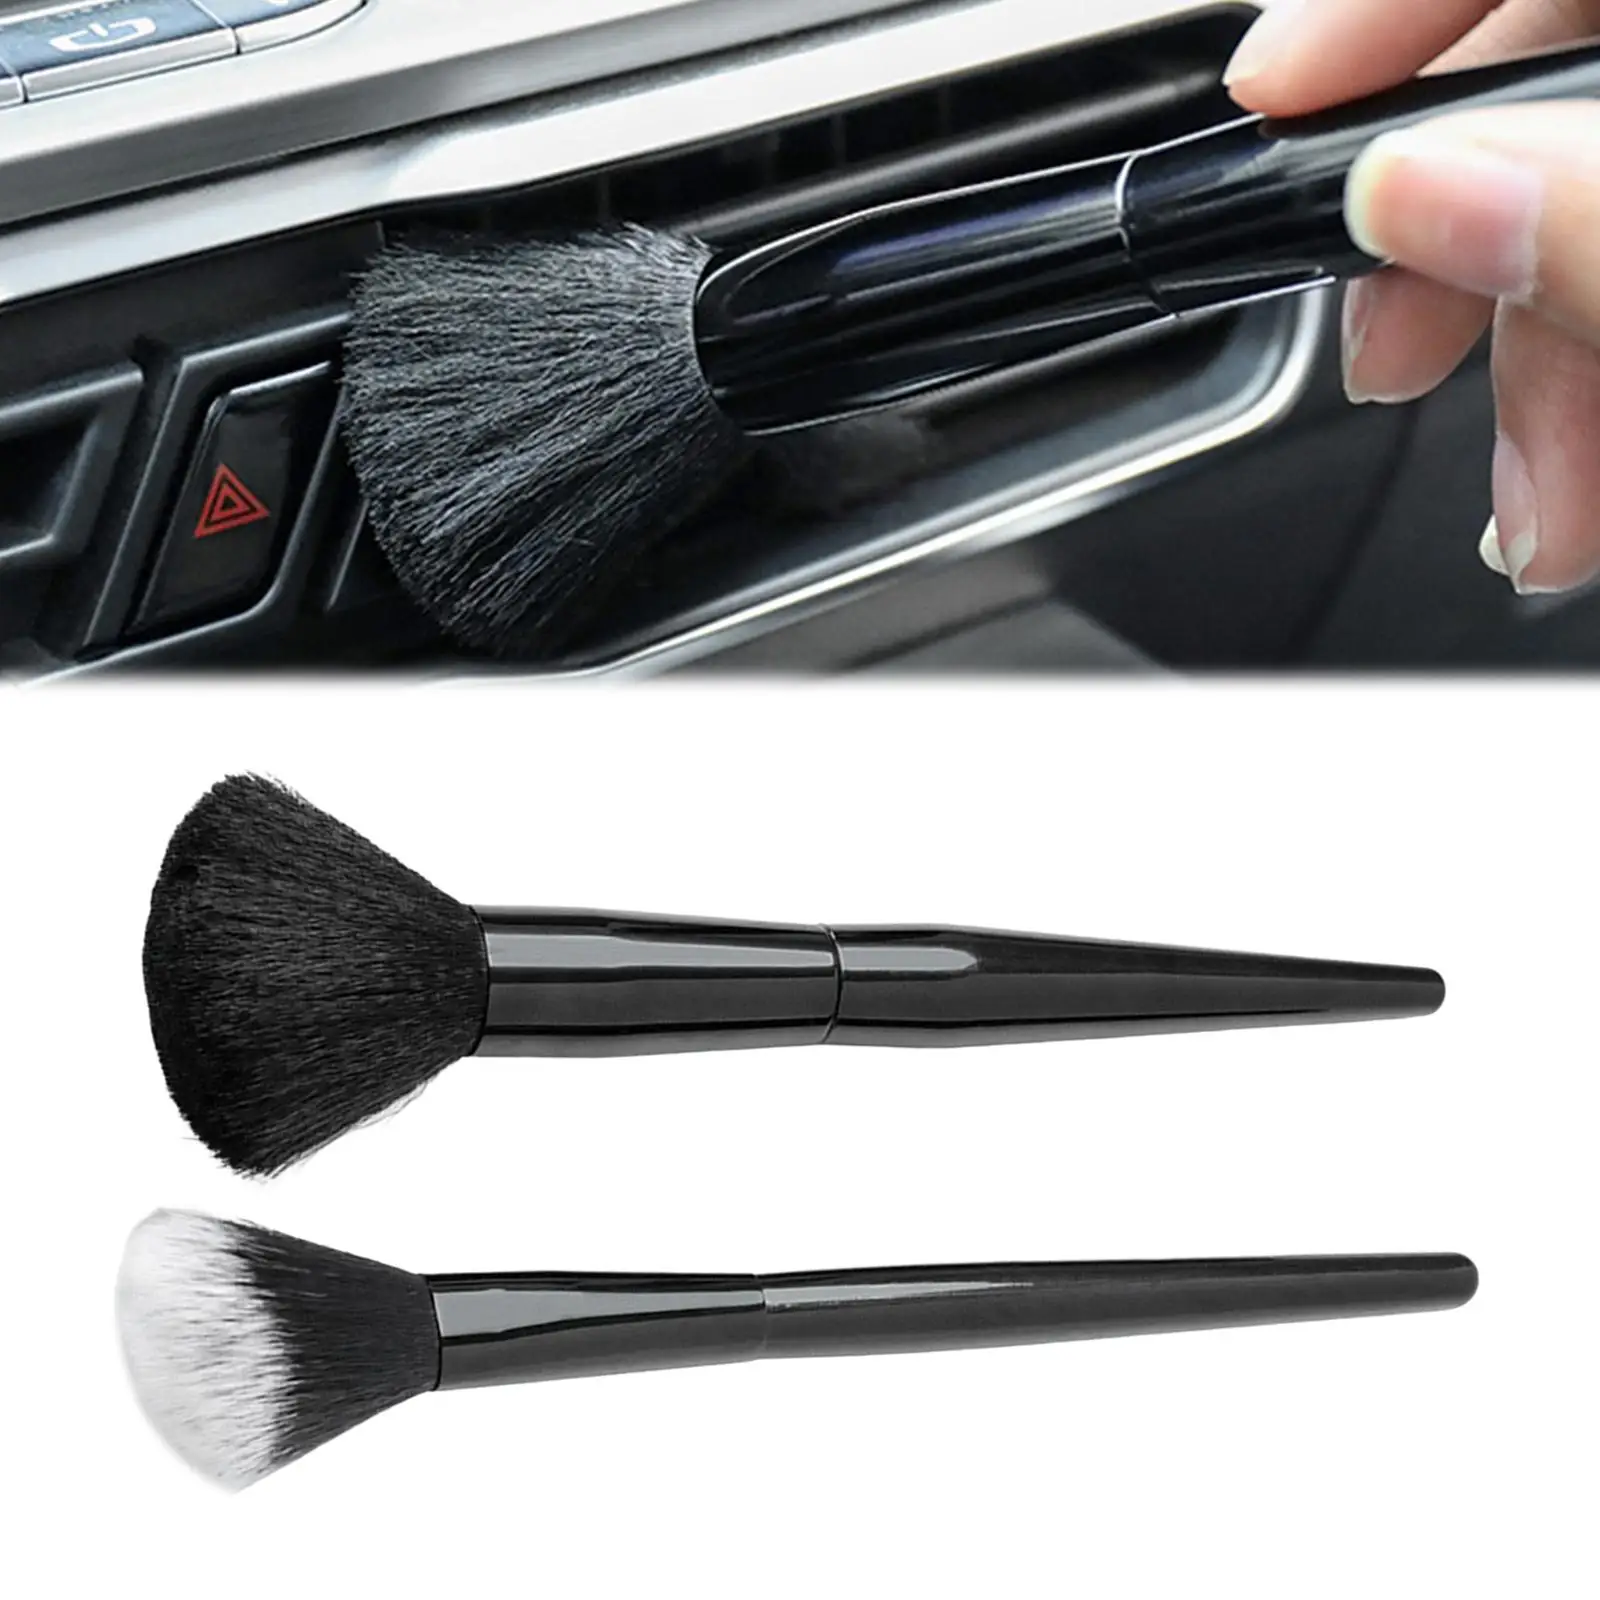 2Pcs Car Detailing Brush with Long Handle Wash Cleaning Supplies for Ashboard